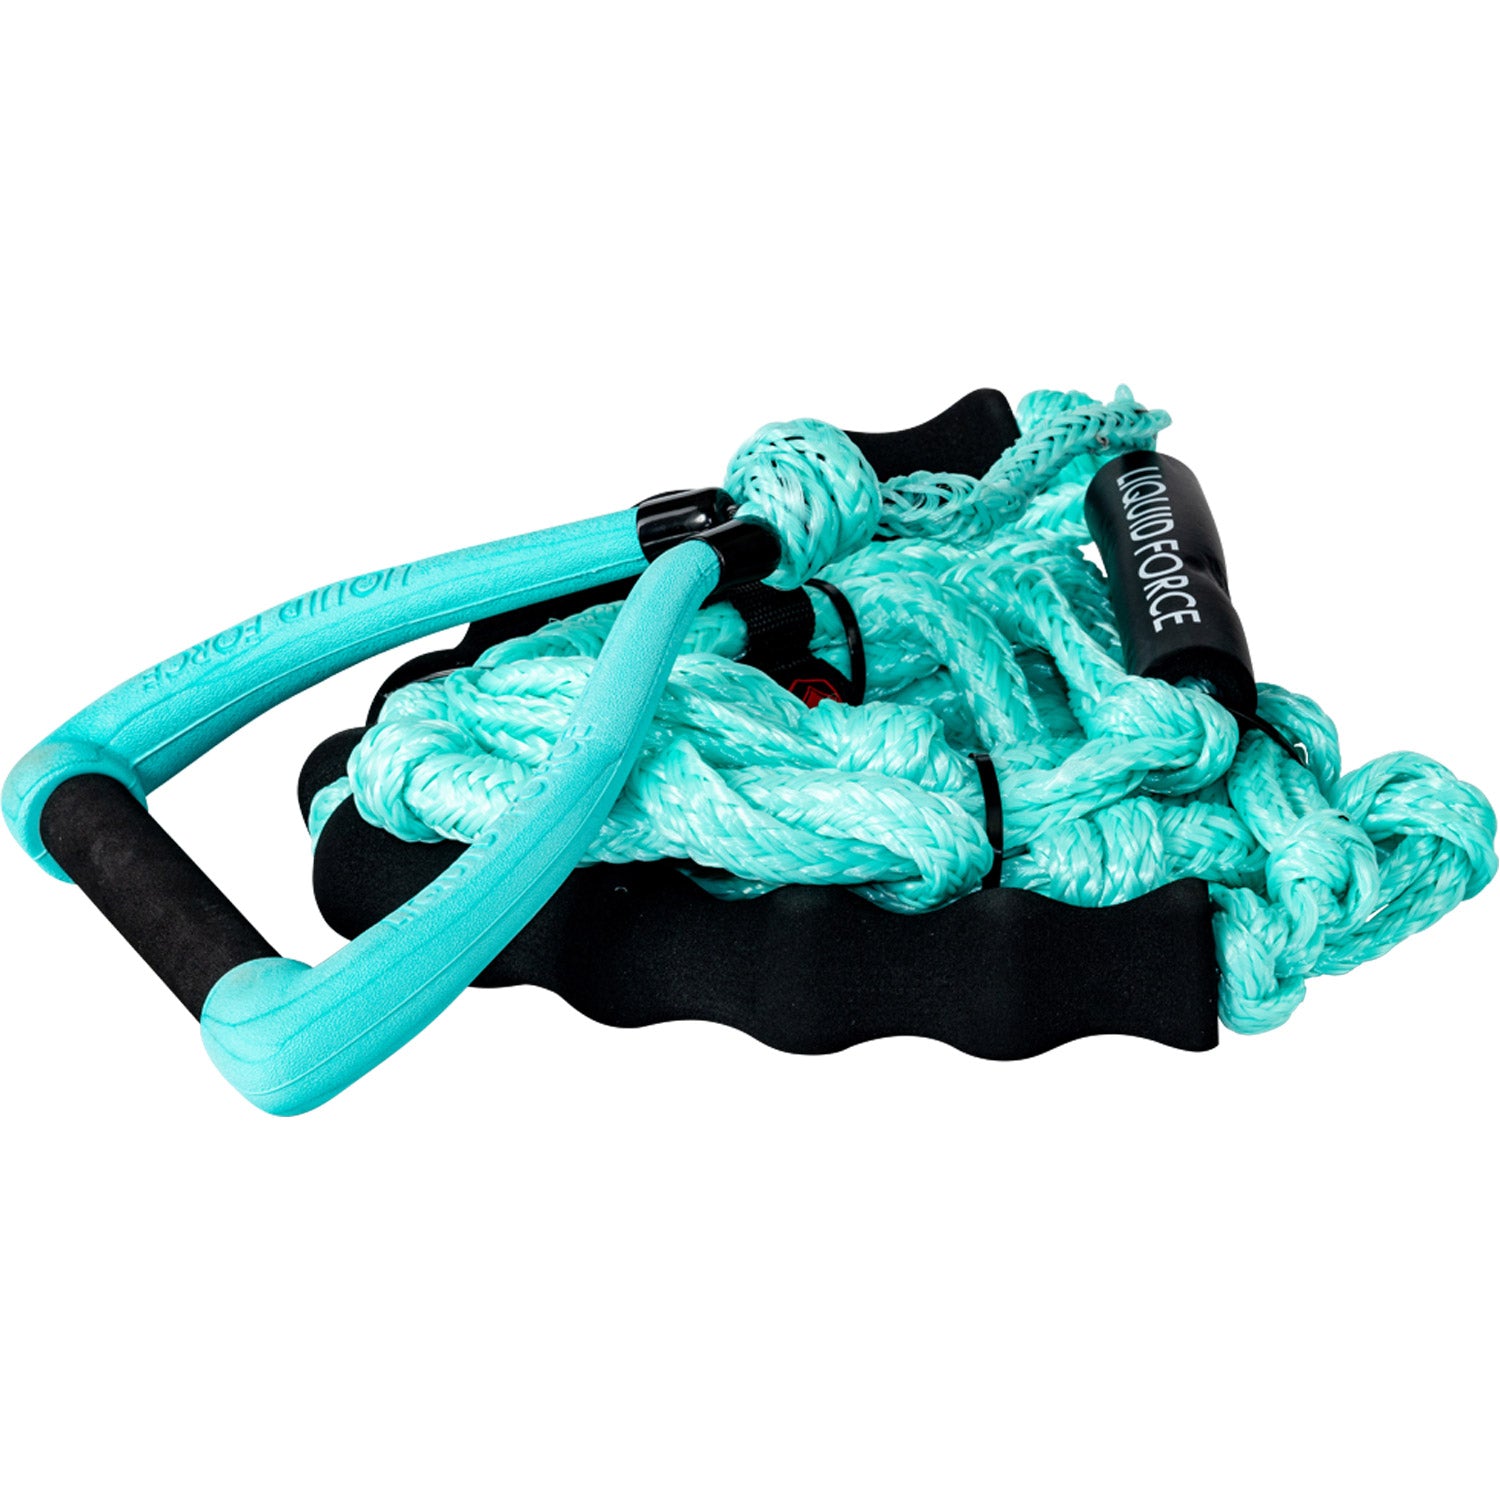 DLX Floating Combo Surf Rope Package